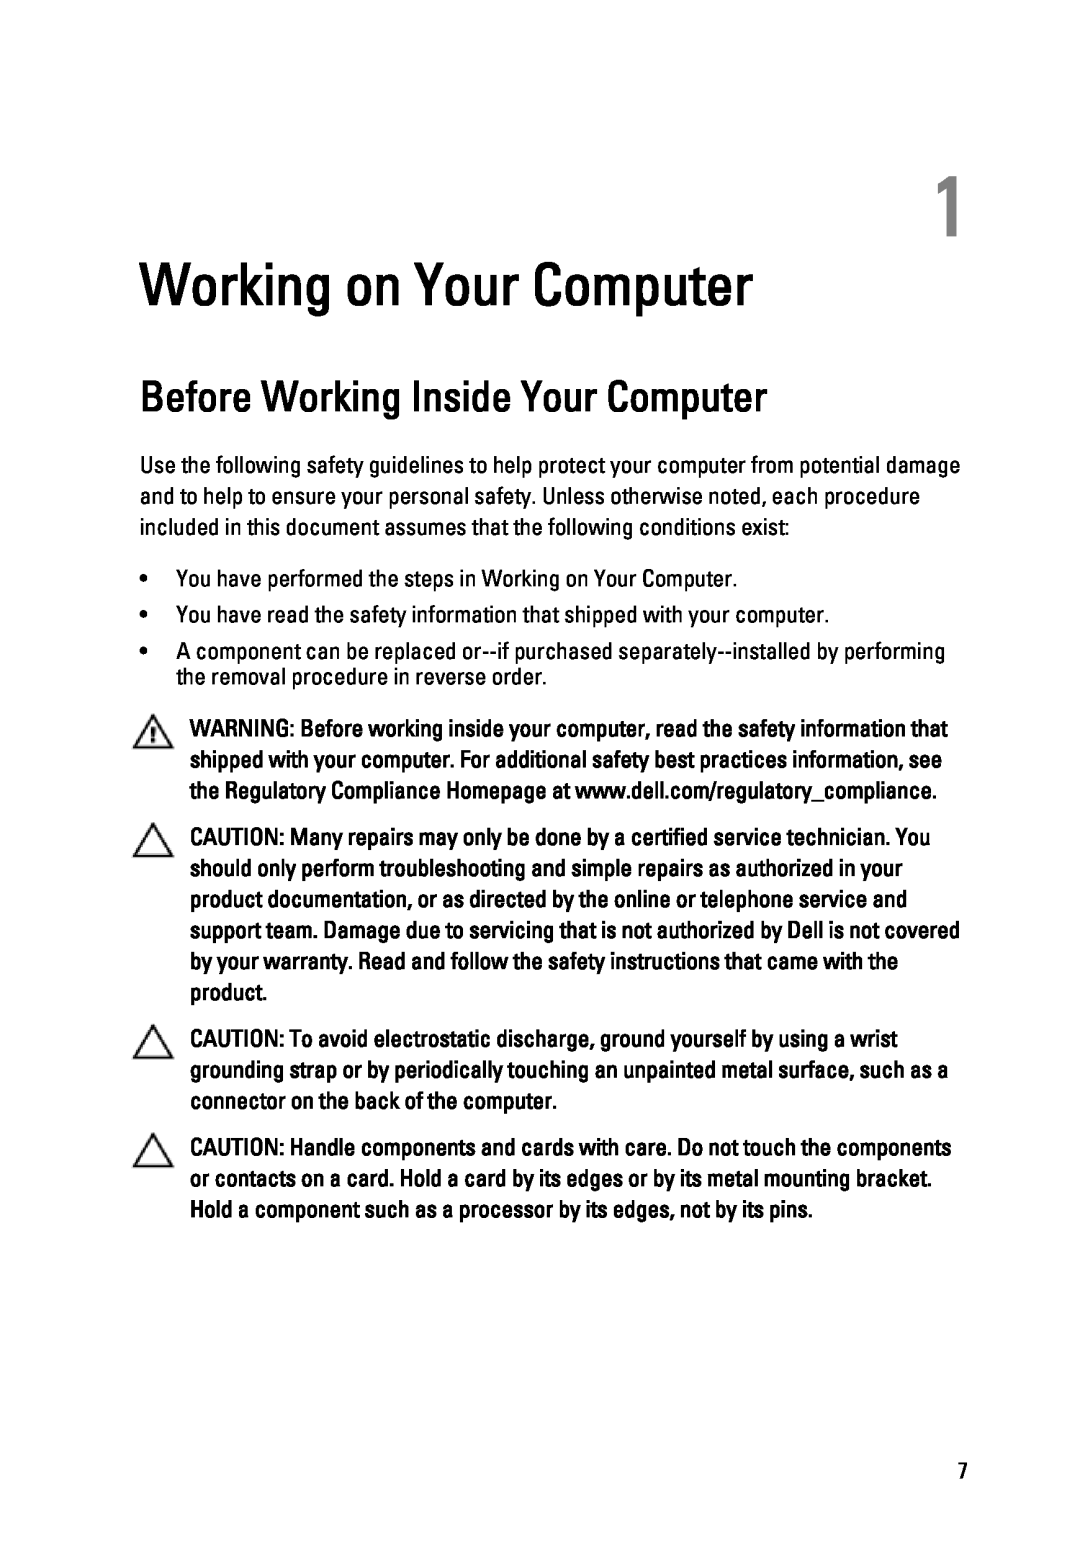 Dell 3450 owner manual Working on Your Computer, Before Working Inside Your Computer 